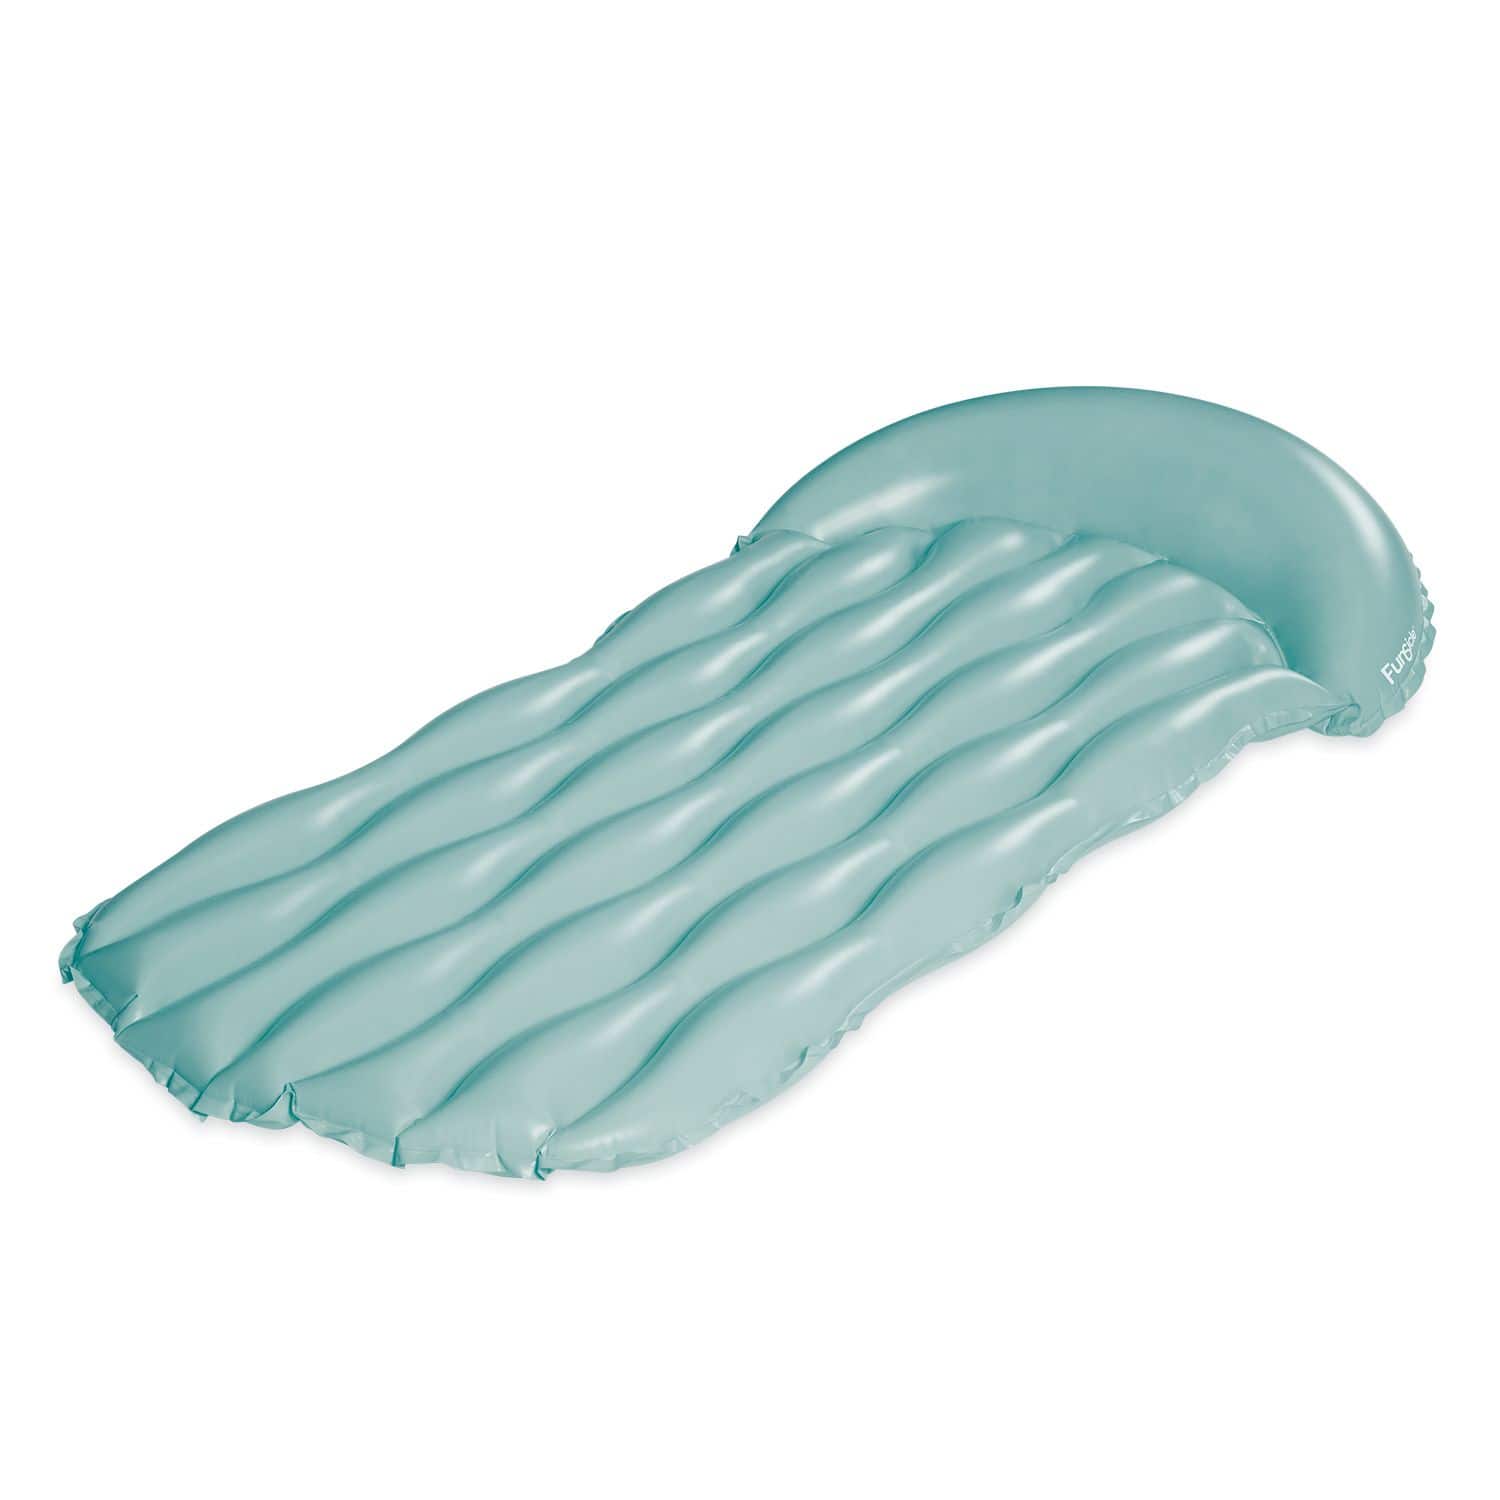 Funsicle Simple ZZ Inflatable Water Mat/ Float, Mint, 72-in x 34-in